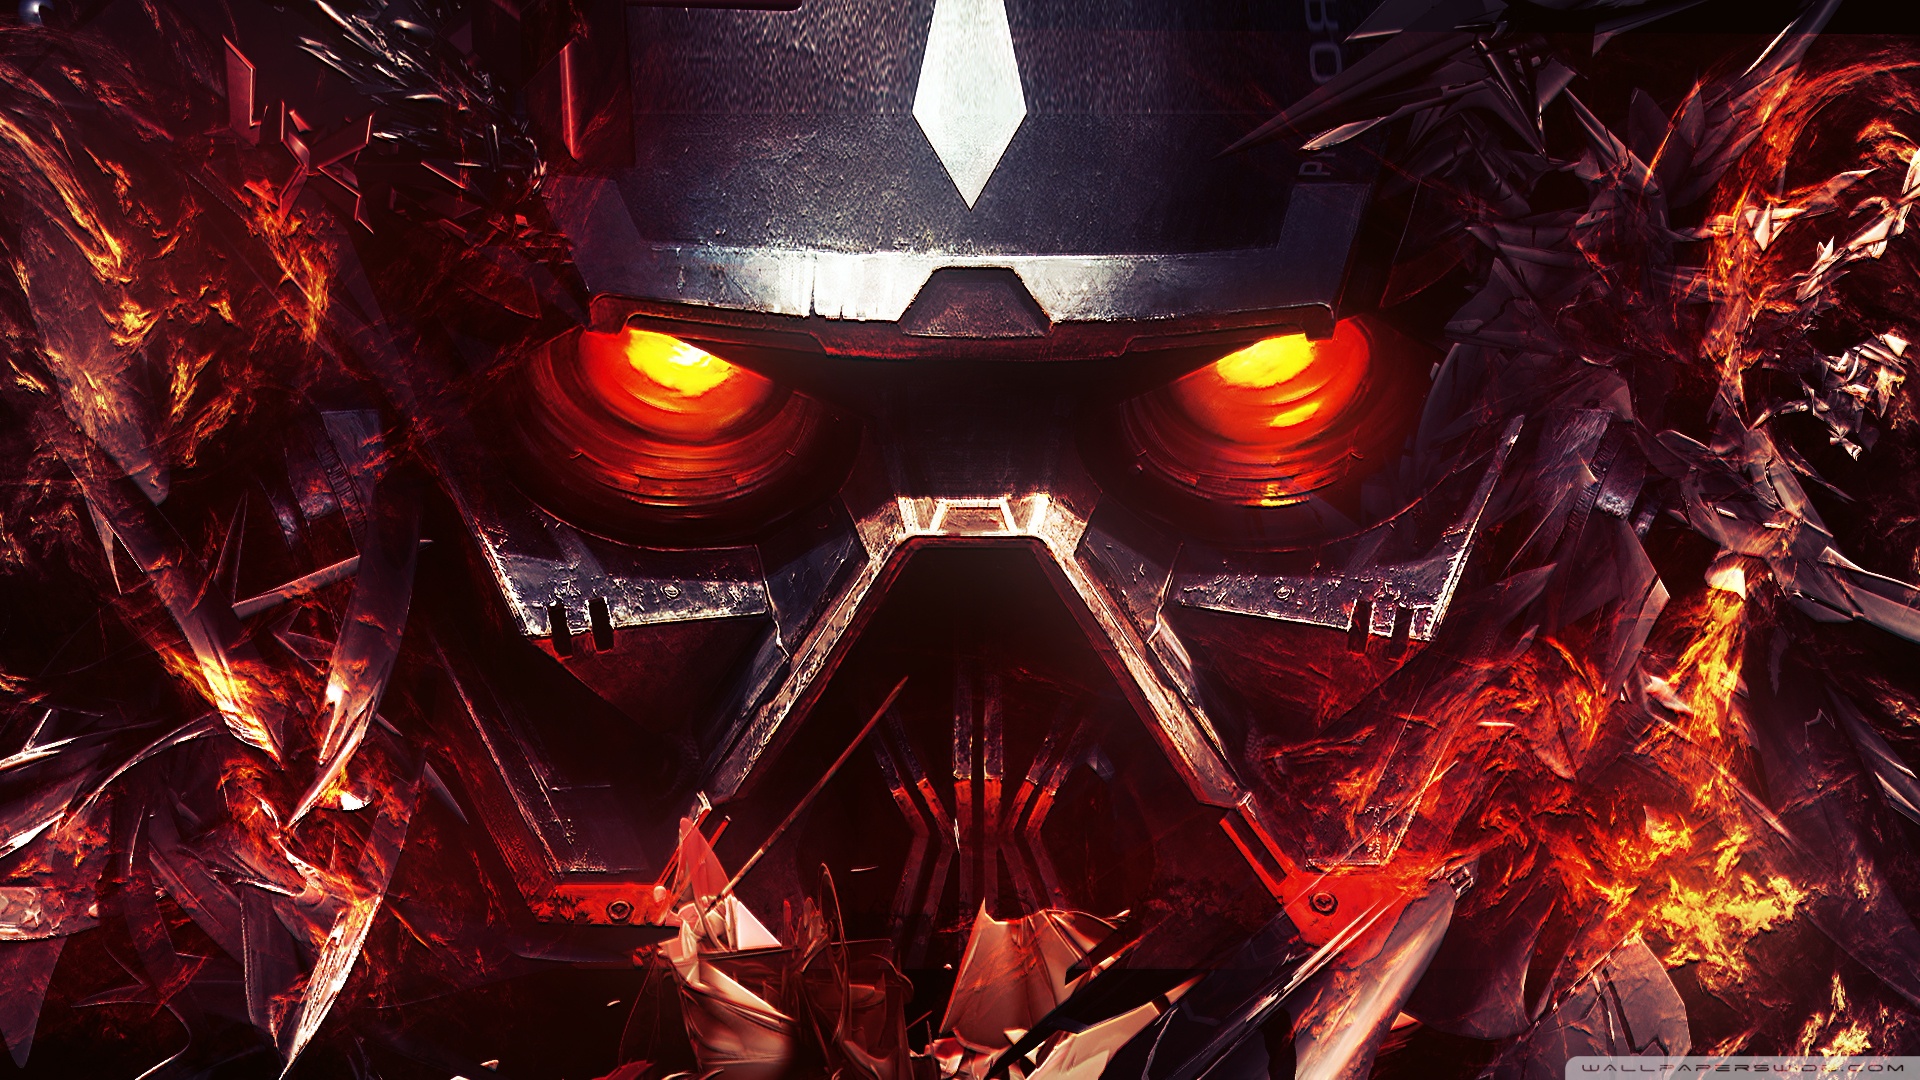 under the flags of helghast by ropa to